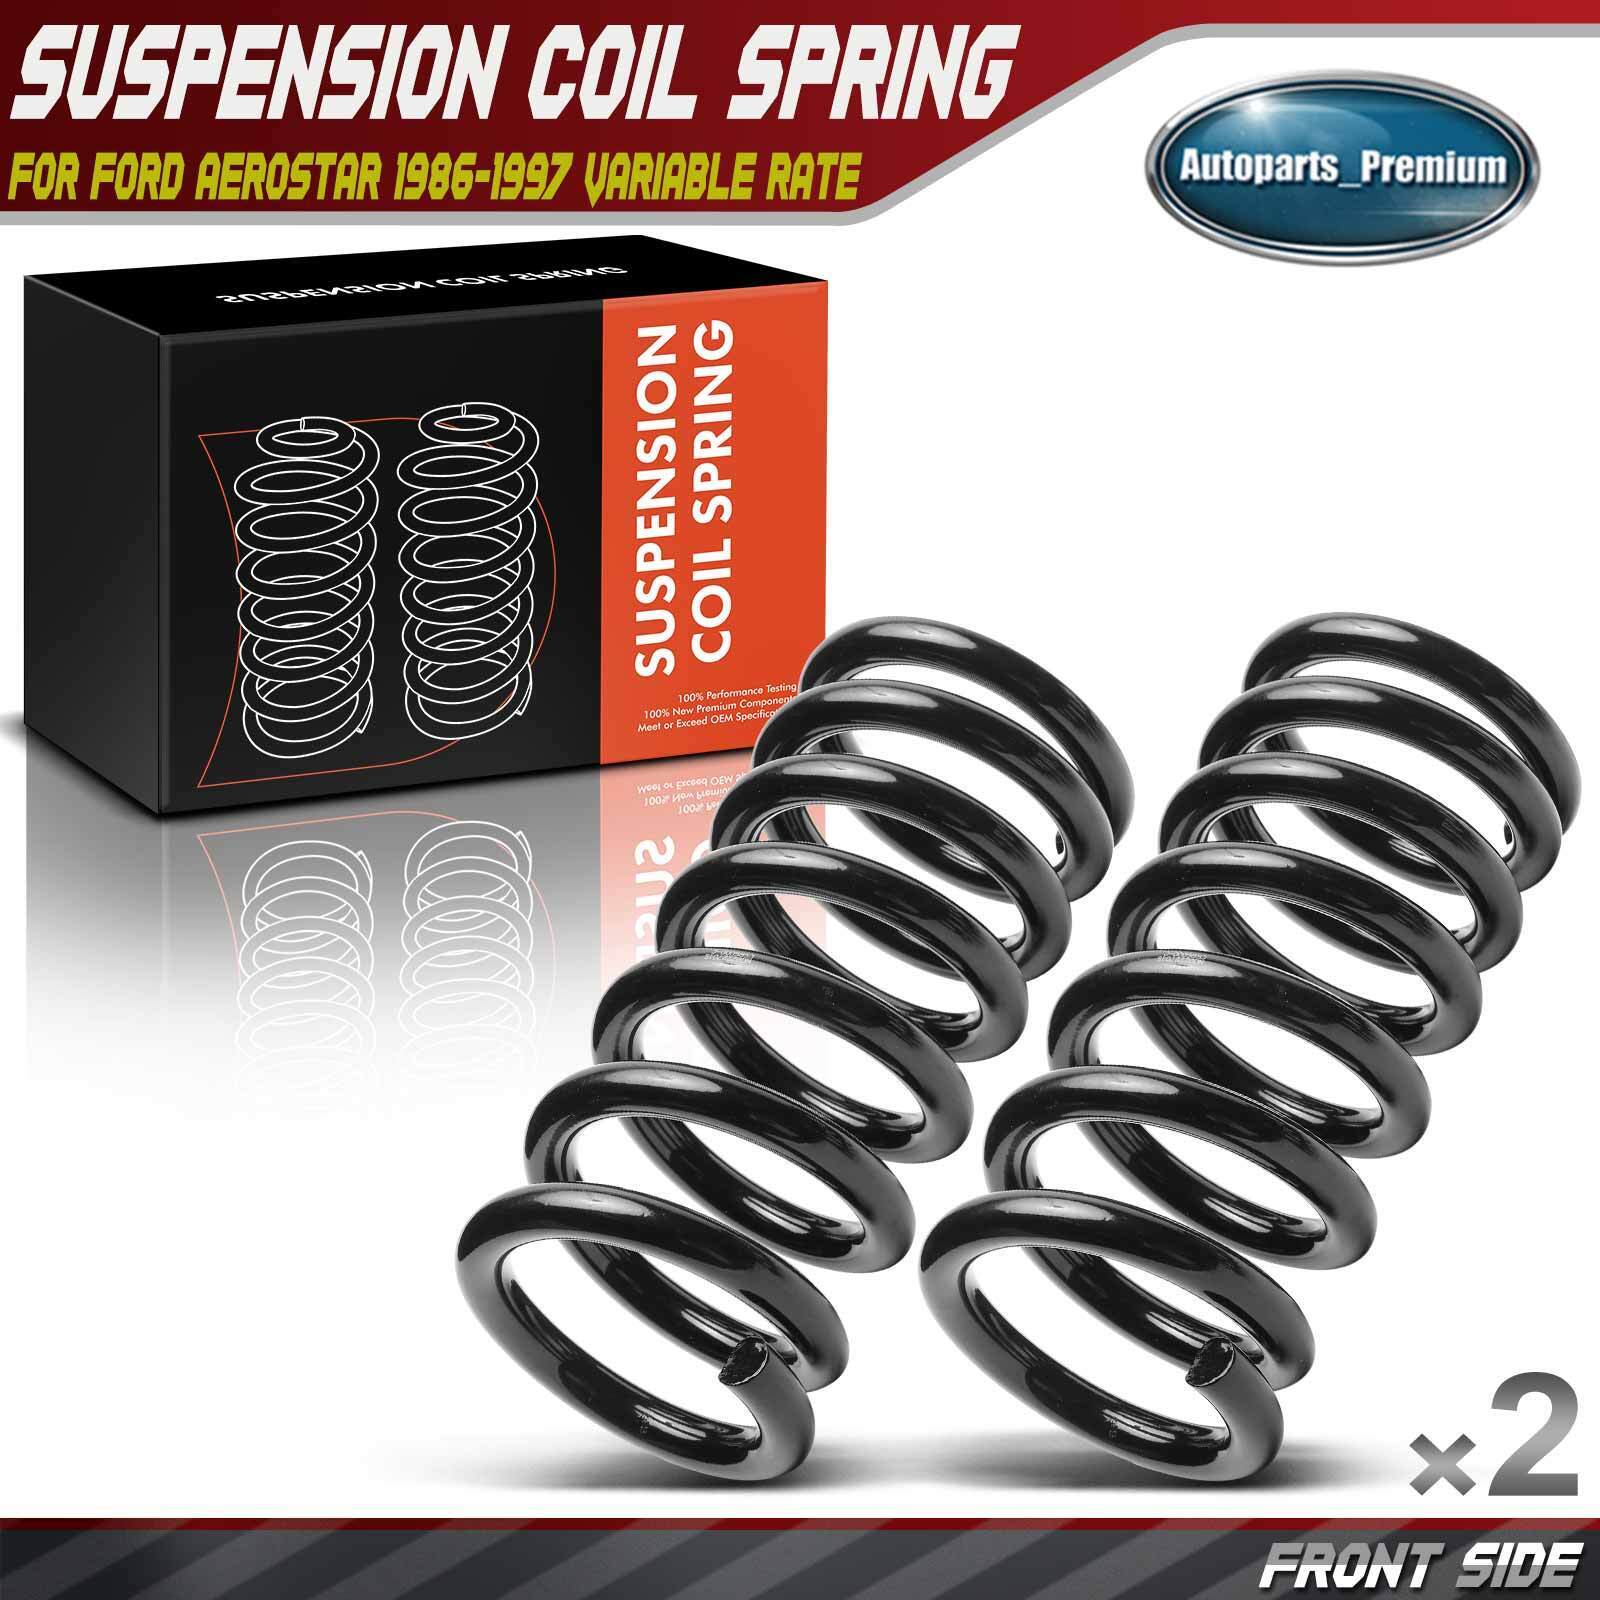 2x Front Left & Right Side Coil Spring for Ford Aerostar 1986-1997 Variable Rate